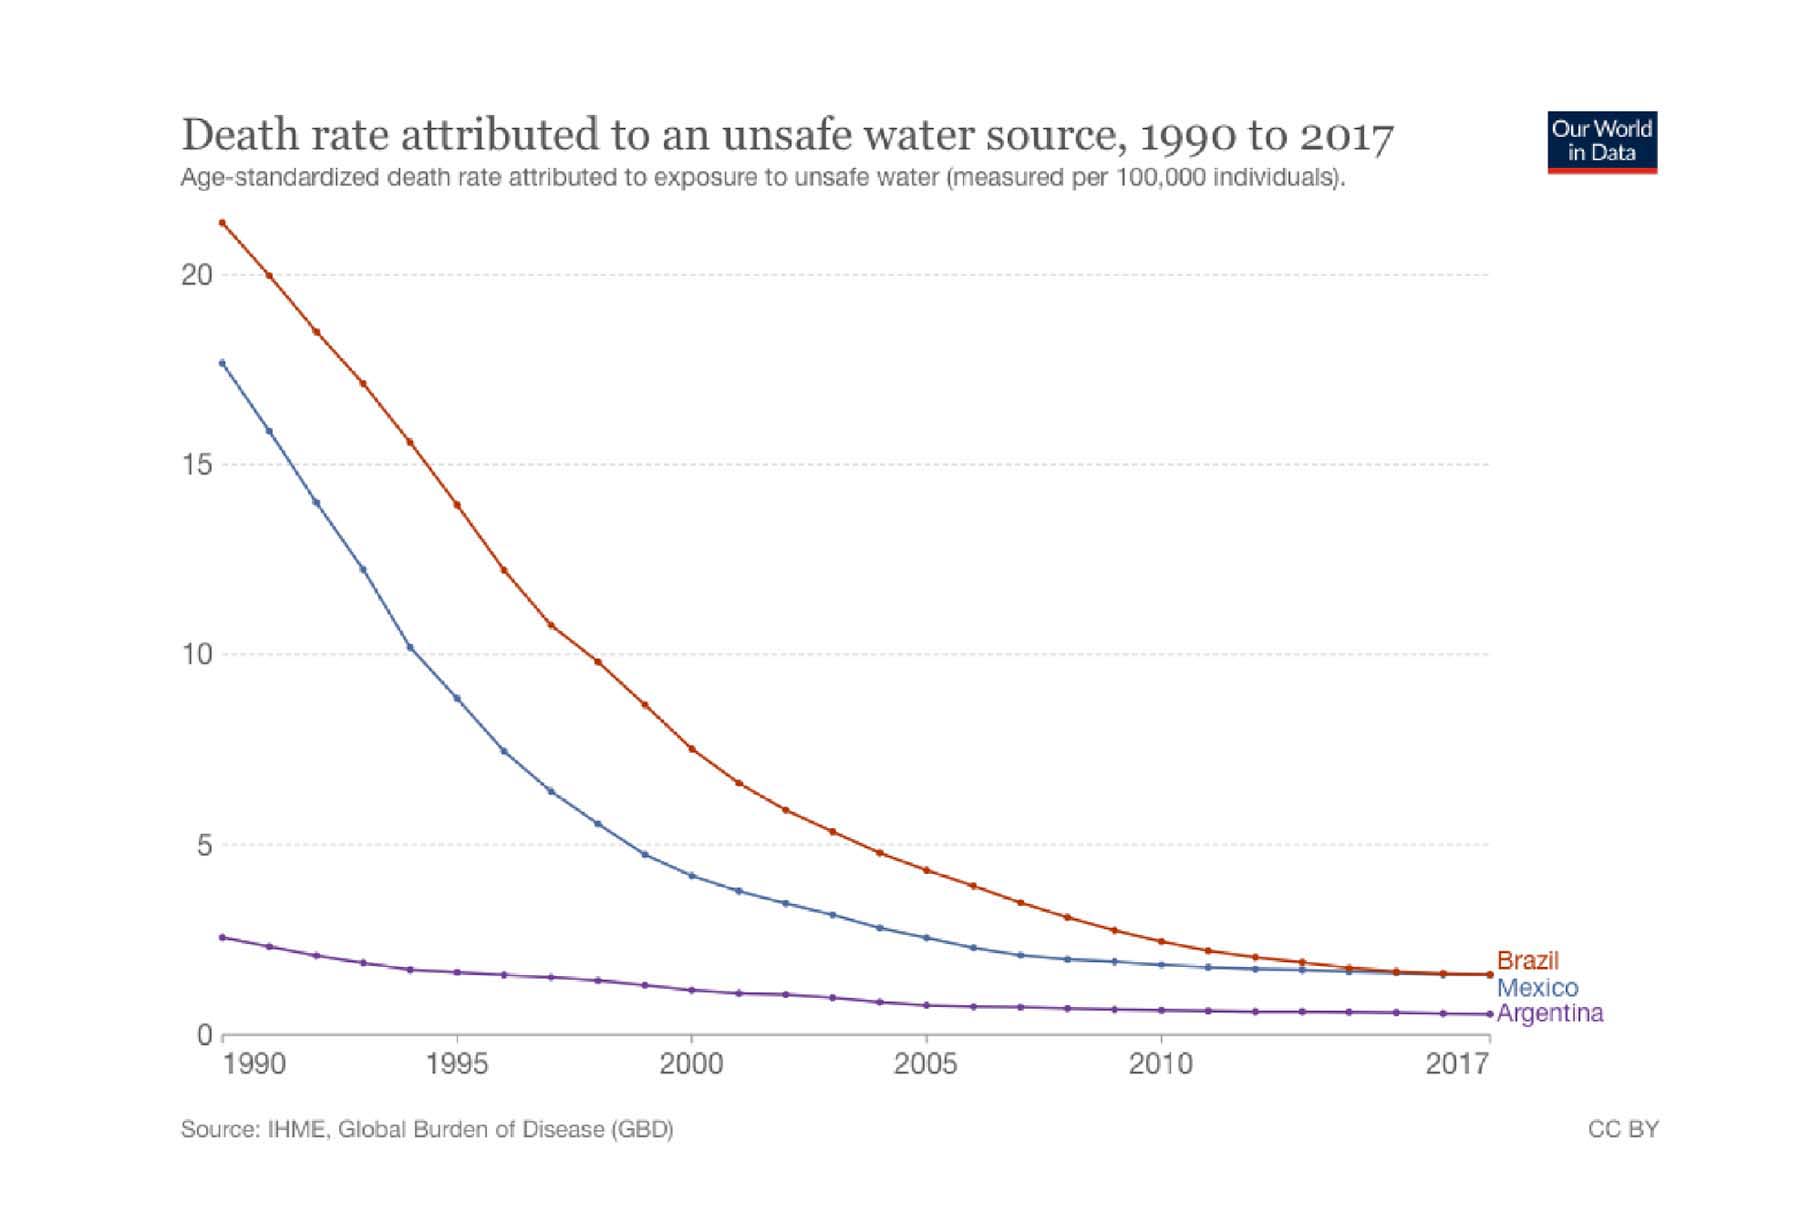 Death Rate Attributed to Unsafe Water 1990 to 2017 Brazil, Mexico, Argentina